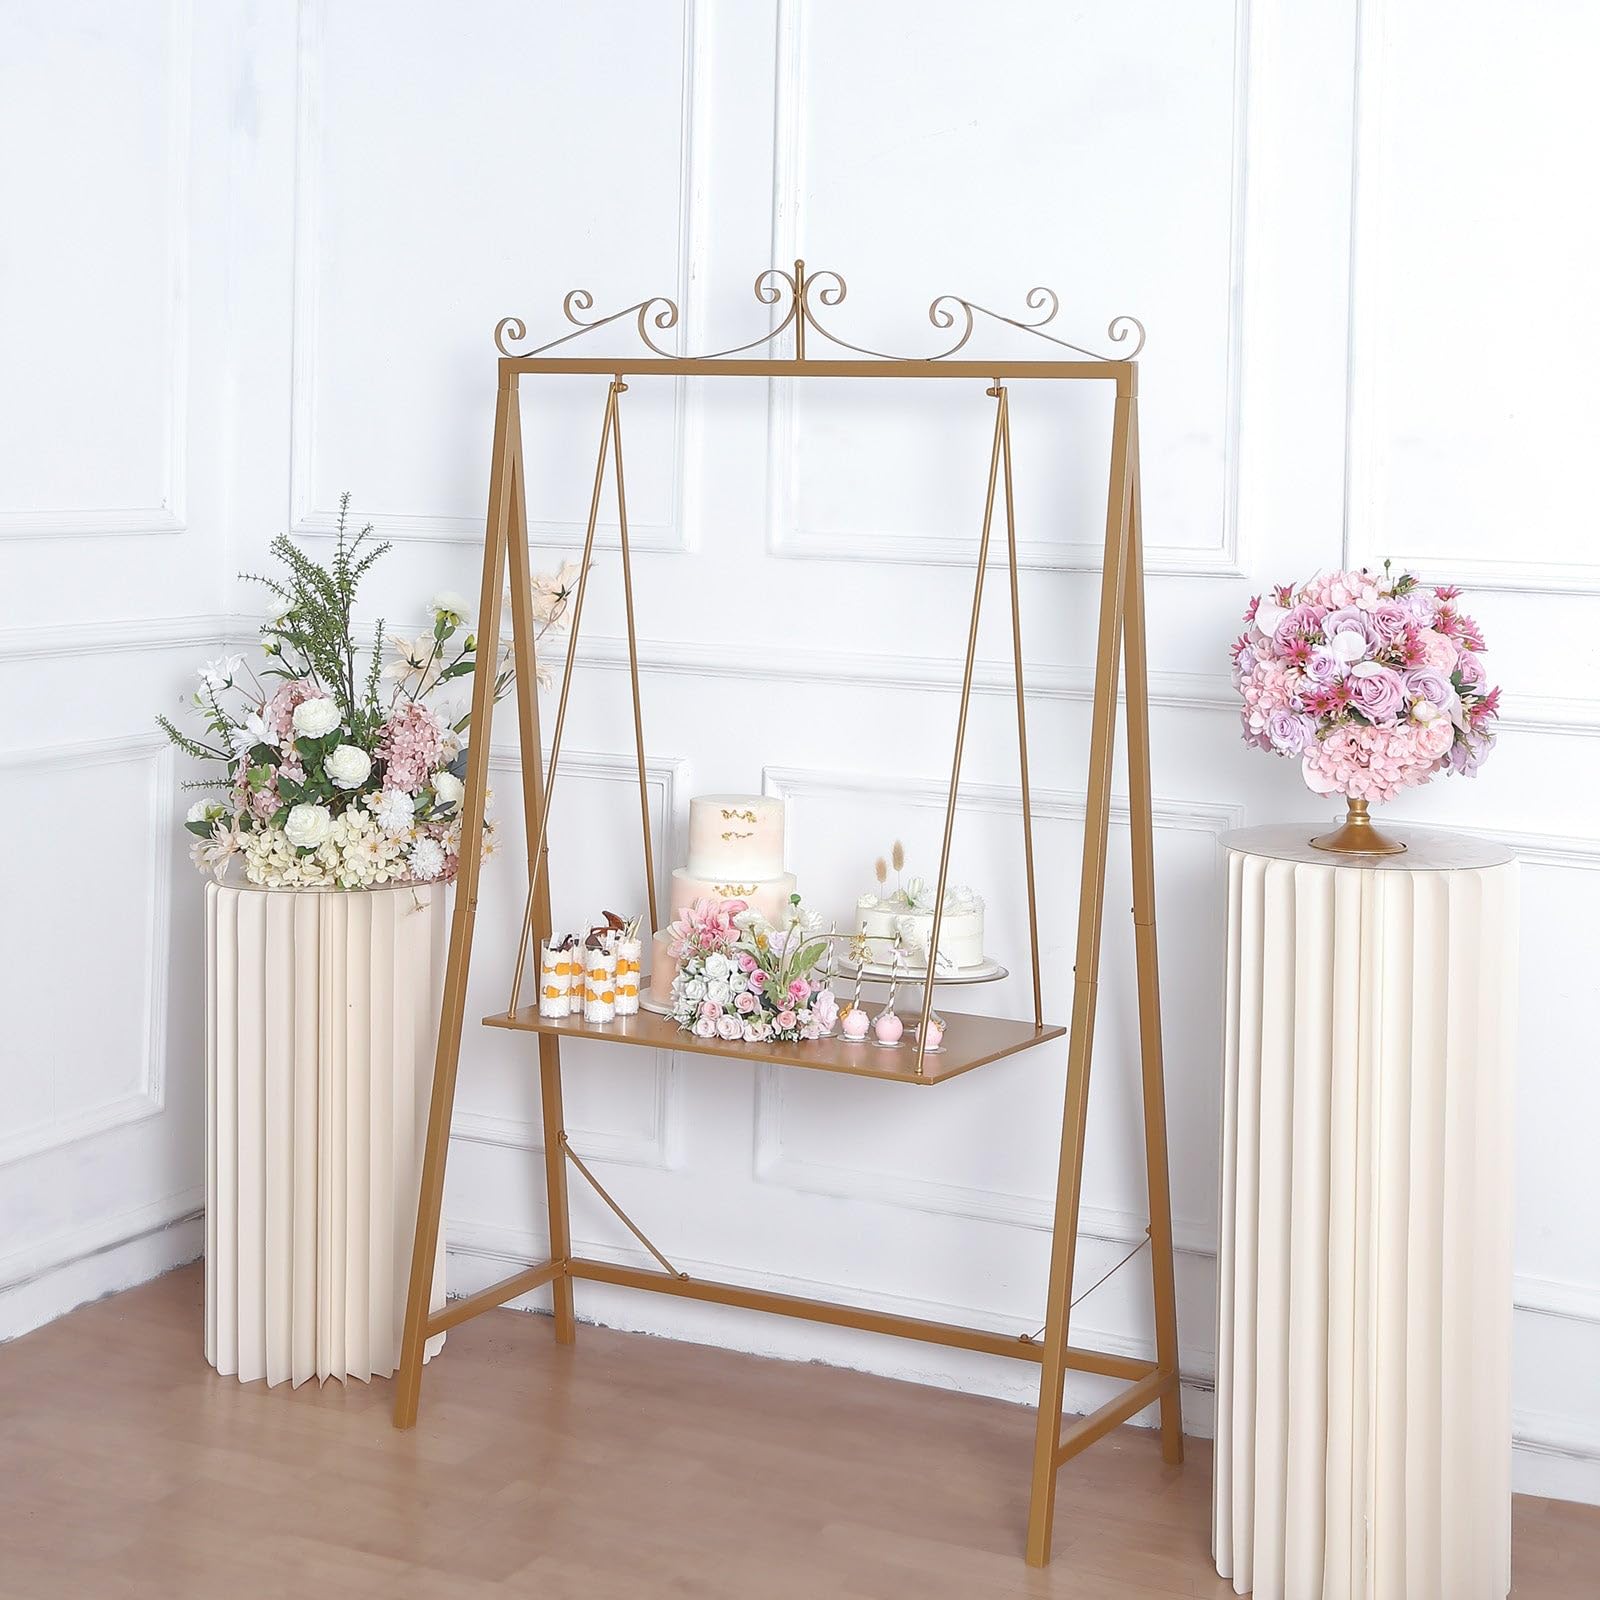 TABLECLOTHSFACTORY 6ft Tall Gold Metal Unique Hanging Dessert Display Swing Floor Stand, Elegant Cake Serving Station